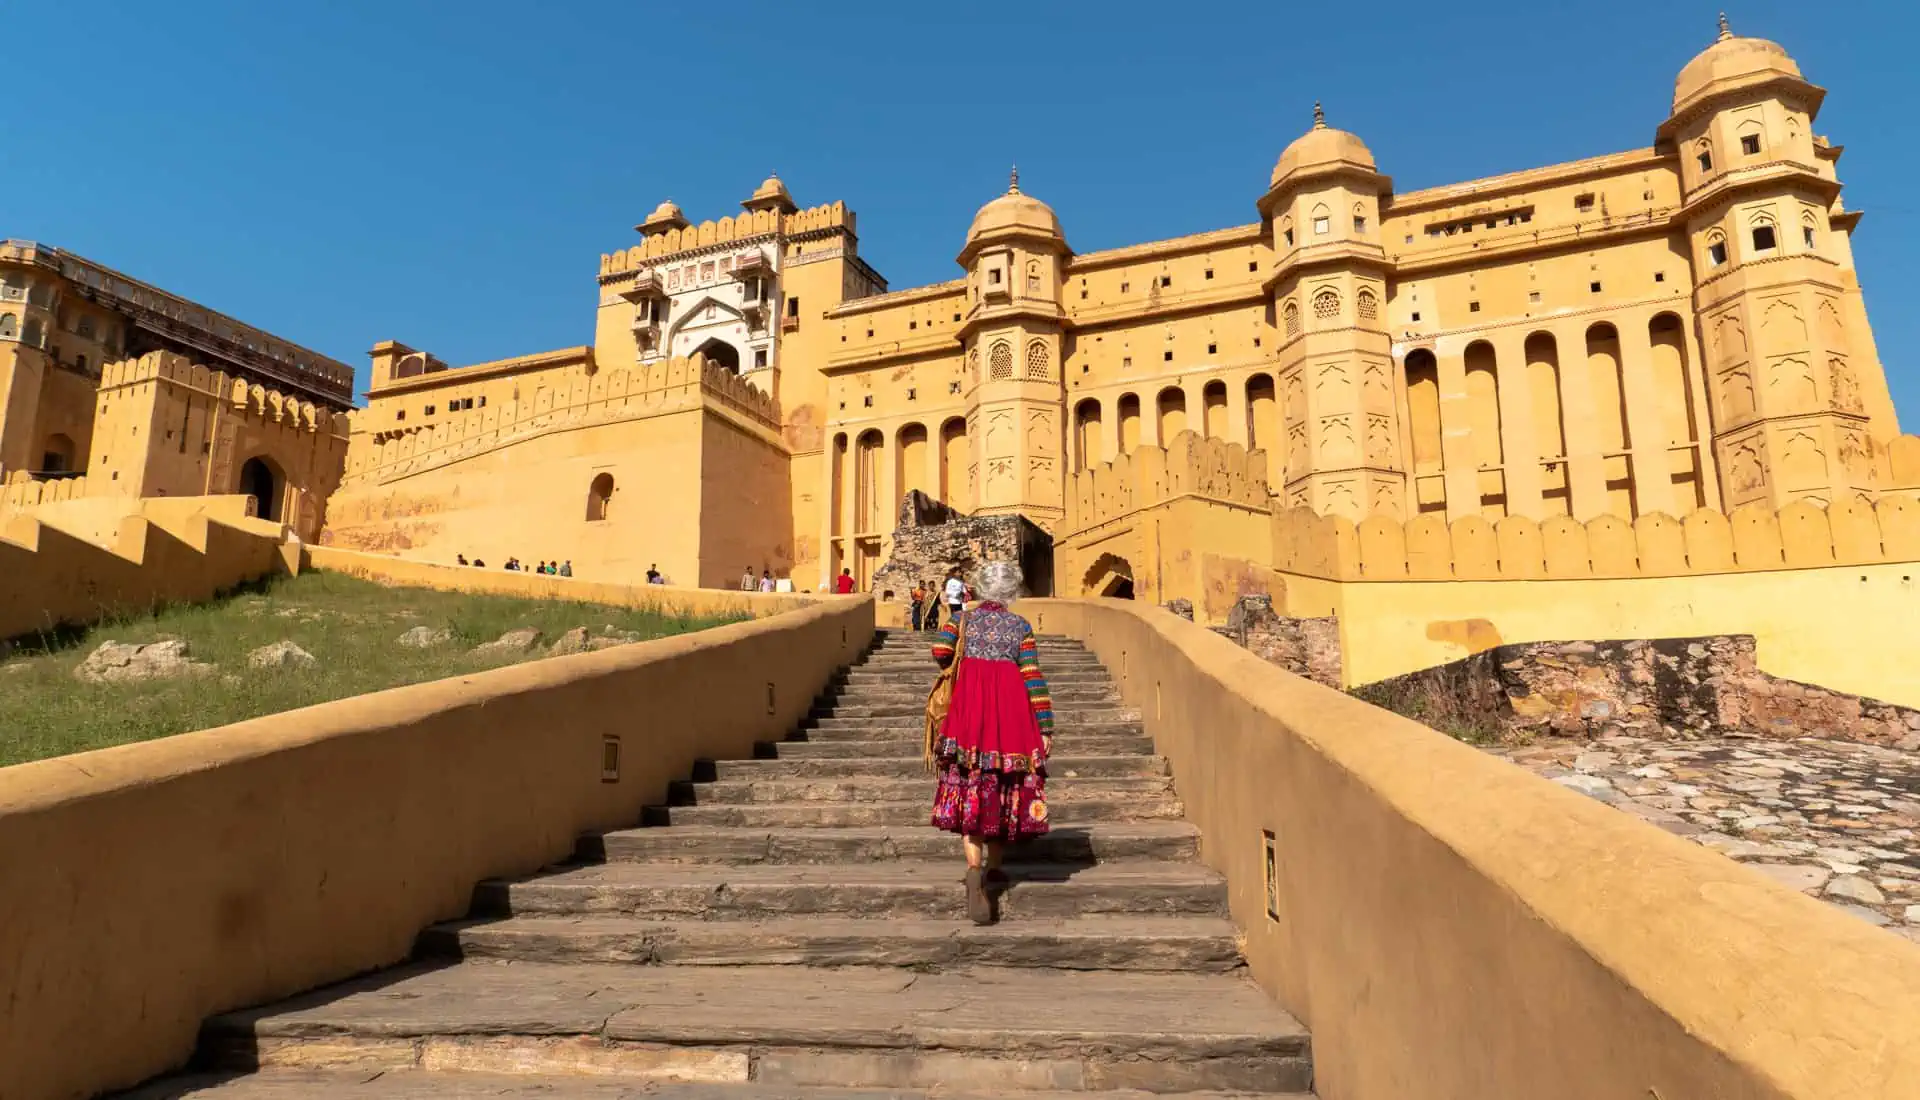 The imposing stairway to Amber Fort, one of the highlights of a Rajasthan road trip in India.